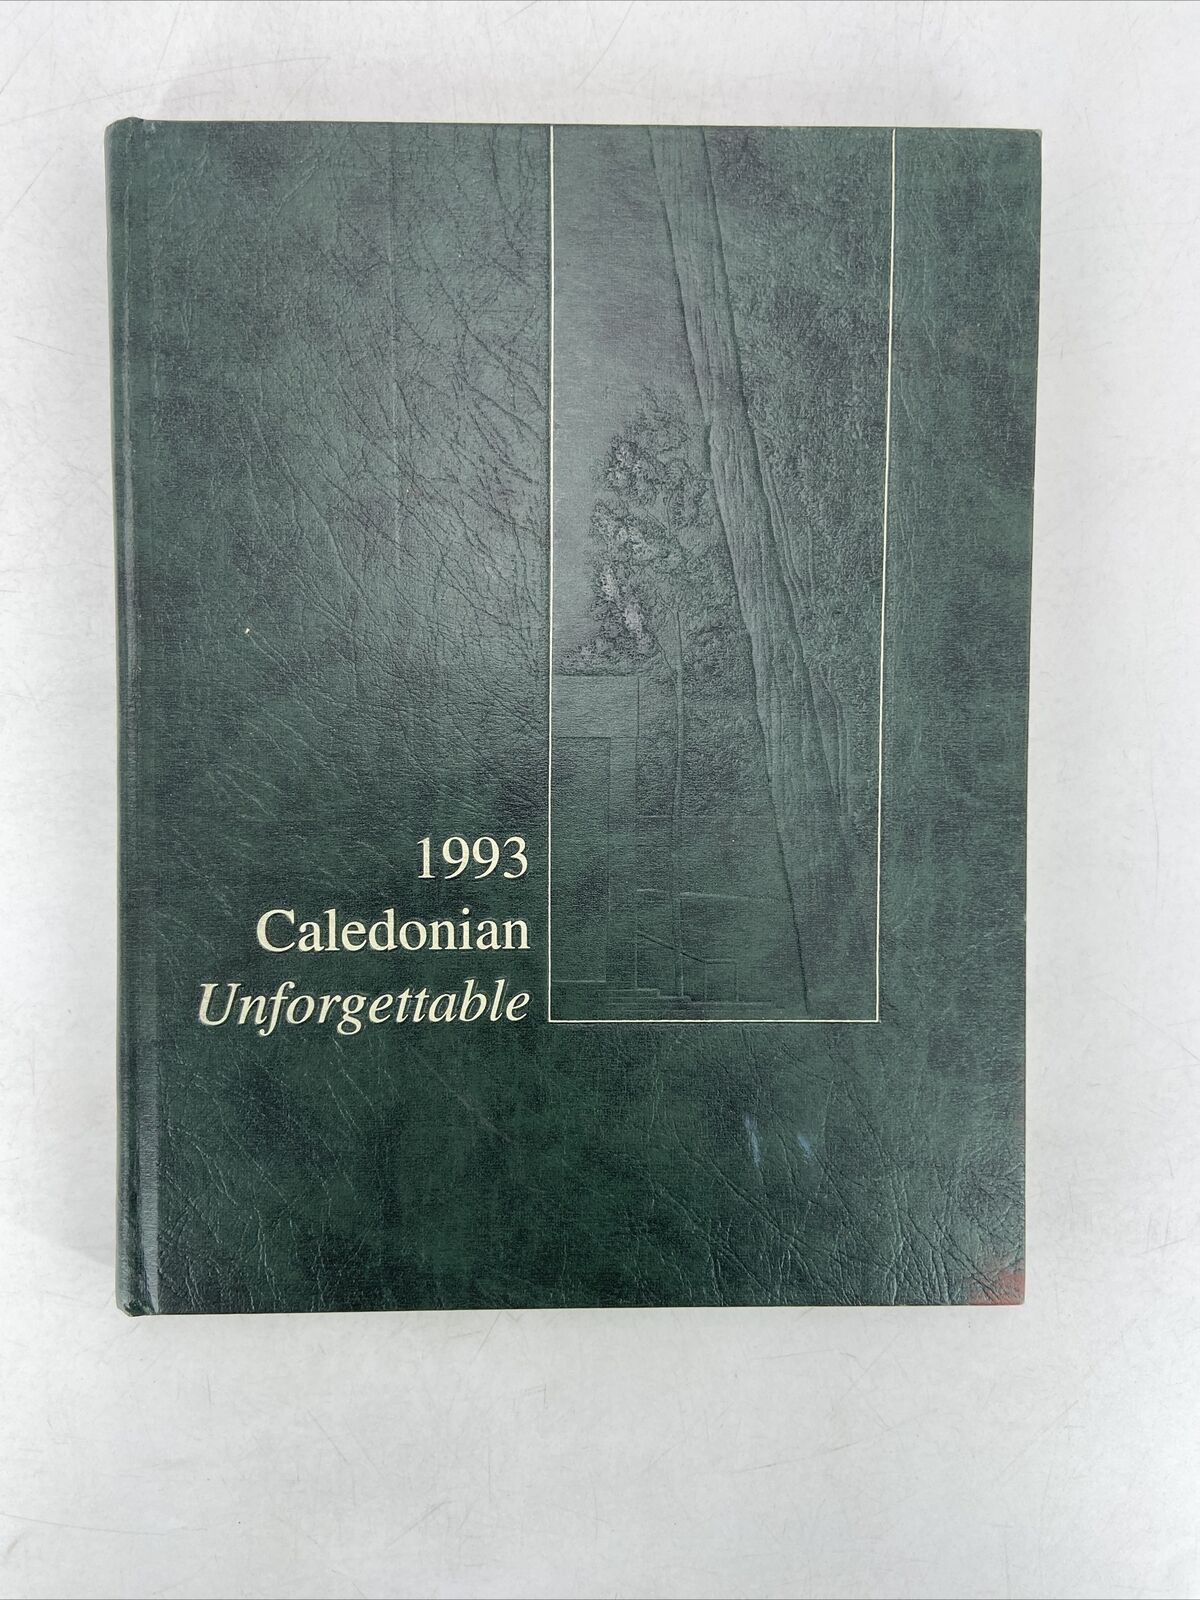 Campbell Hall High School 1993 Yearbook Caledonian